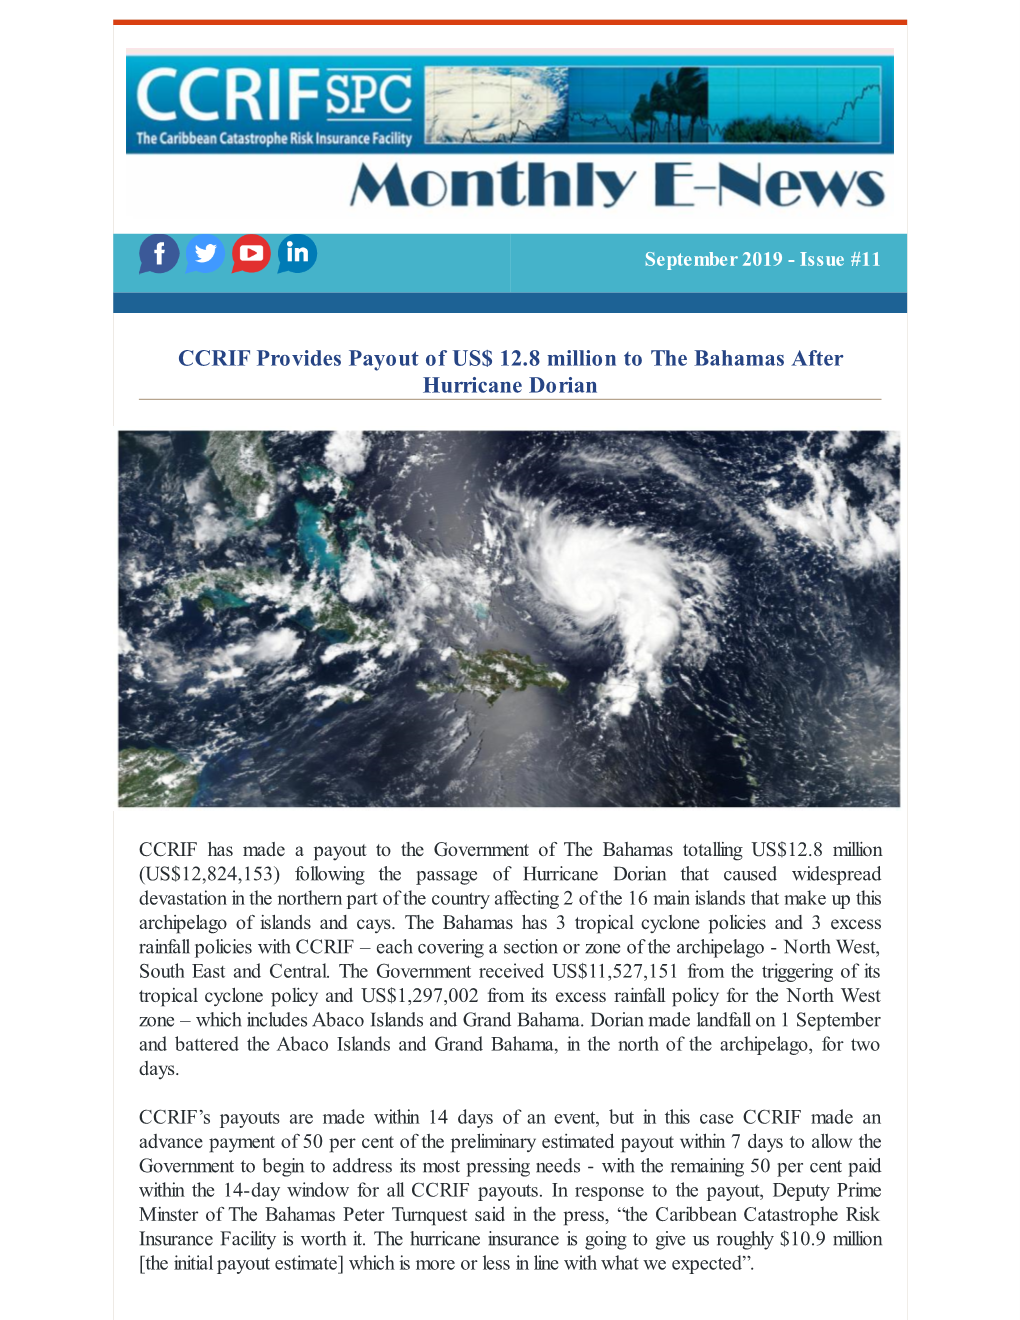 CCRIF Provides Payout of US$ 12.8 Million to the Bahamas After Hurricane Dorian